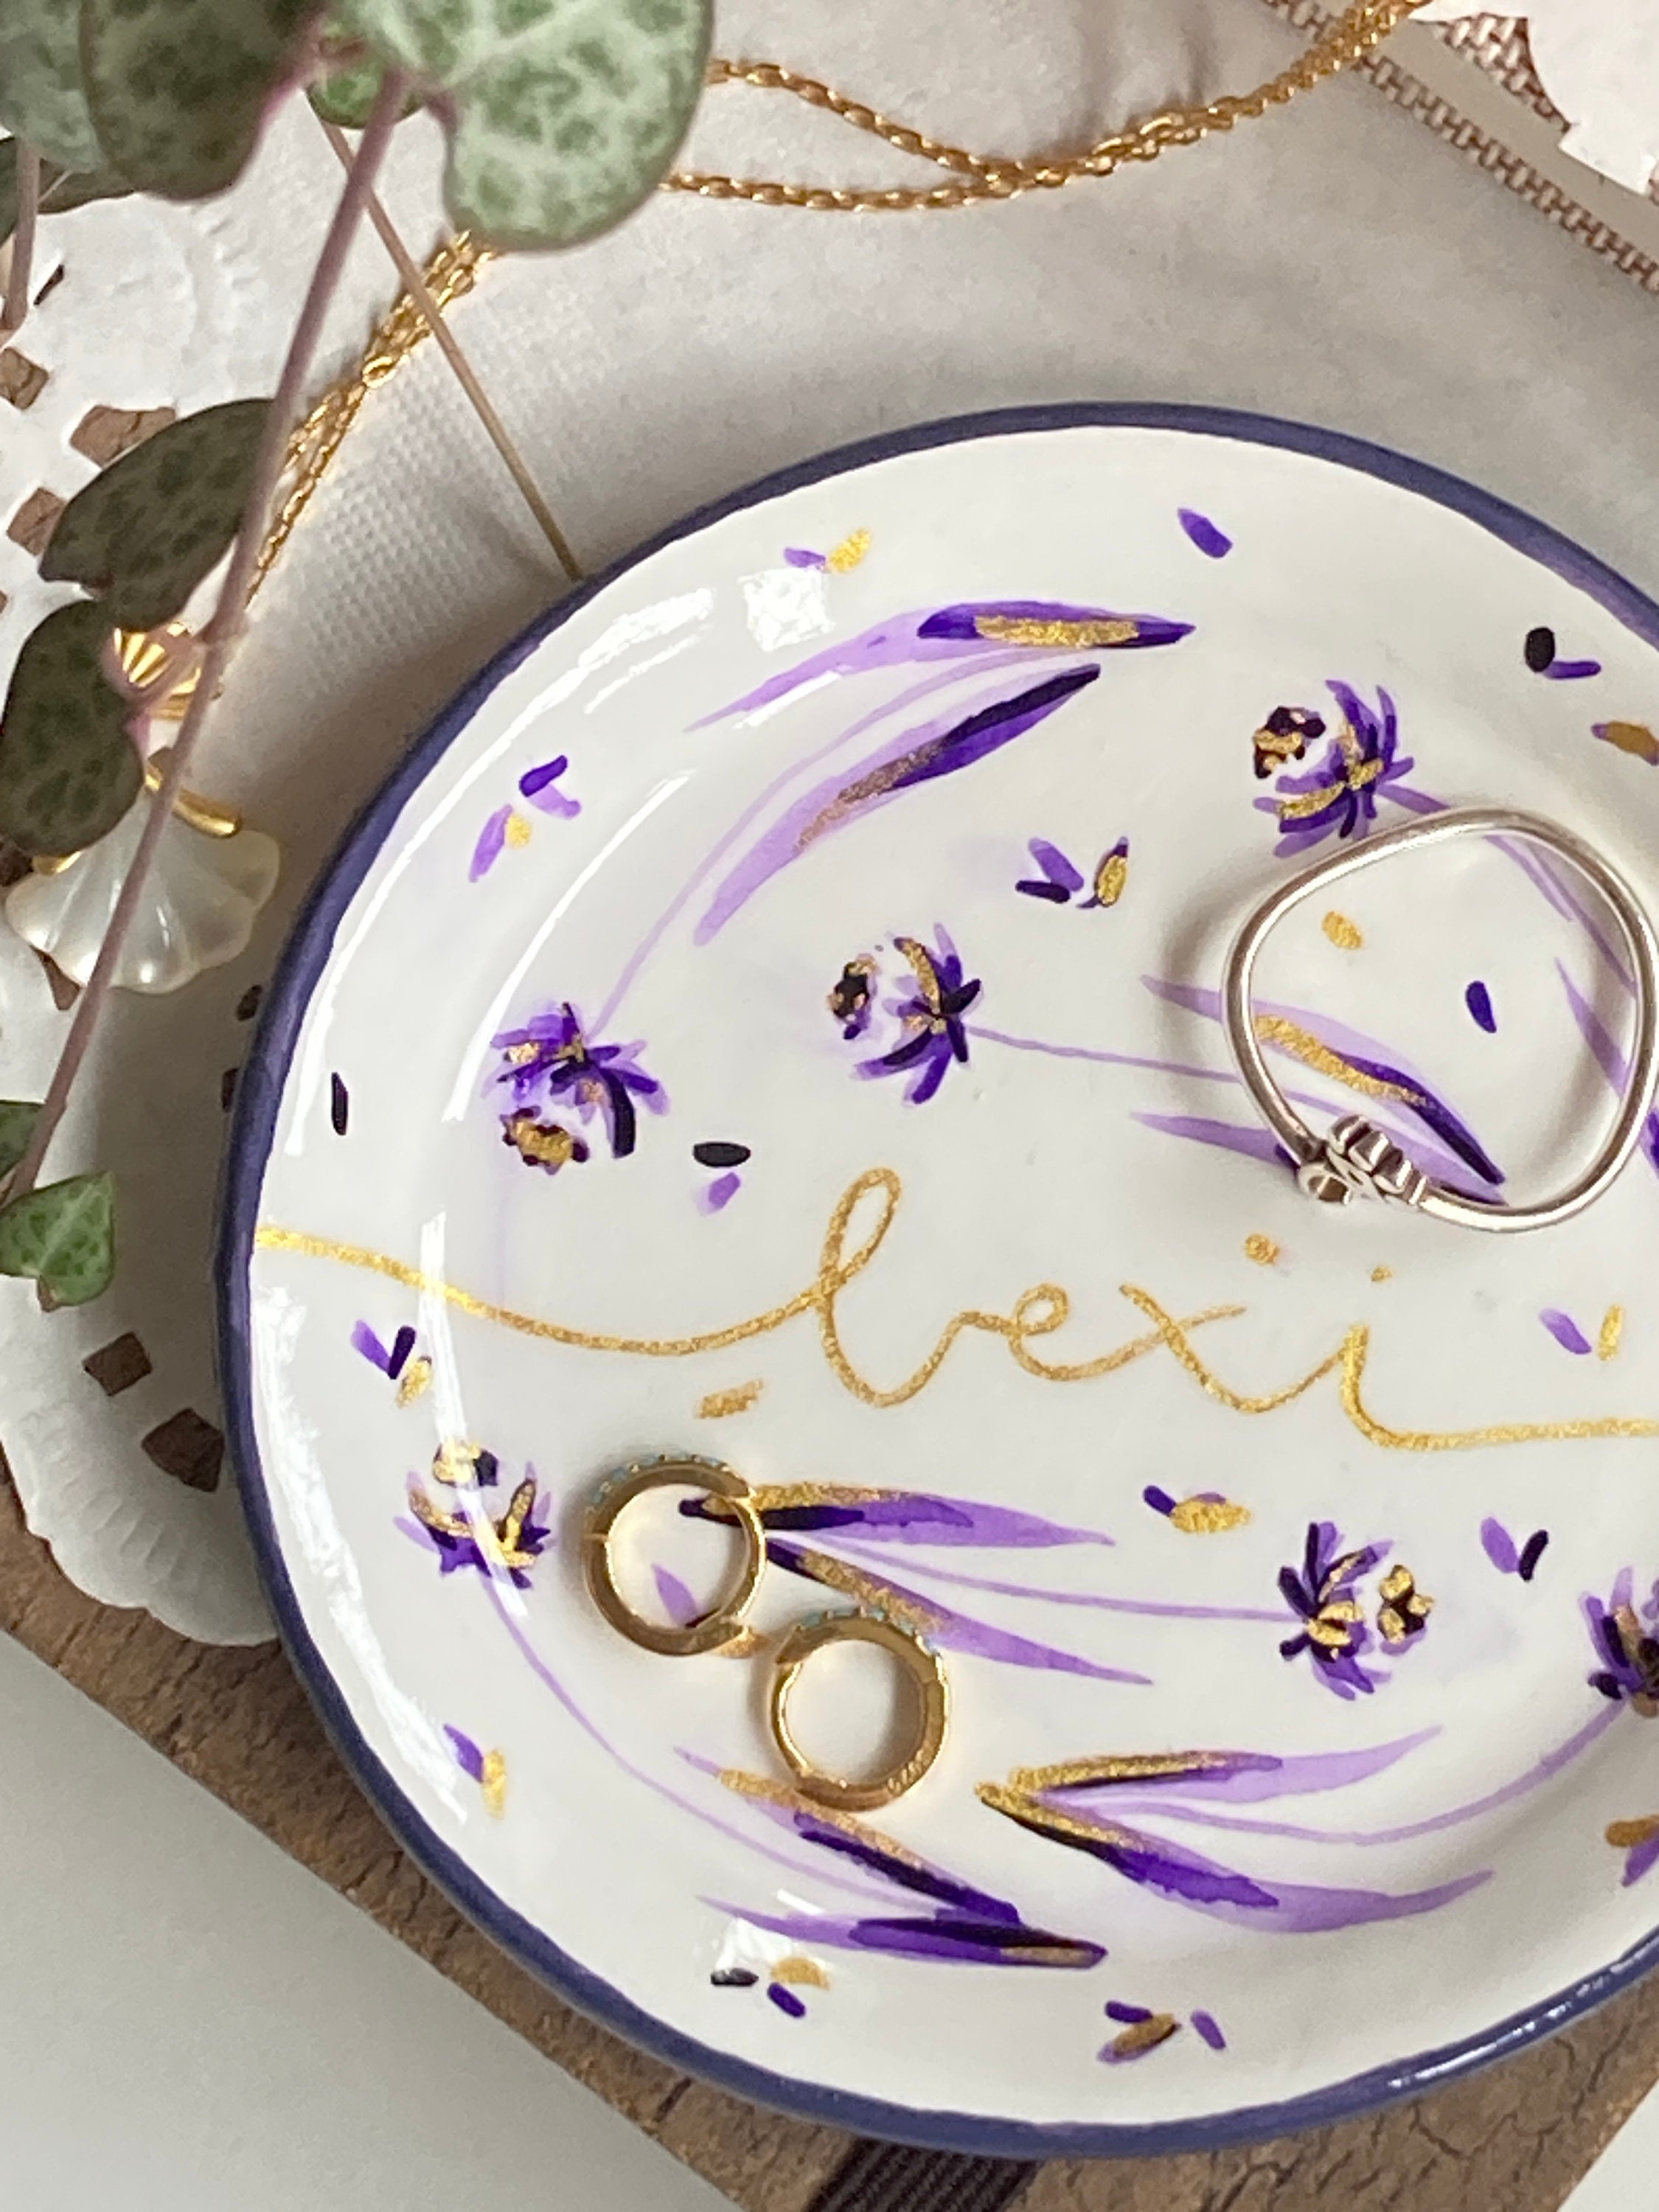 Personalised Name Dish Jewellery Ring Trinket Bowl Gift - Purple, Lilac & Gold Watercolour Floral Small